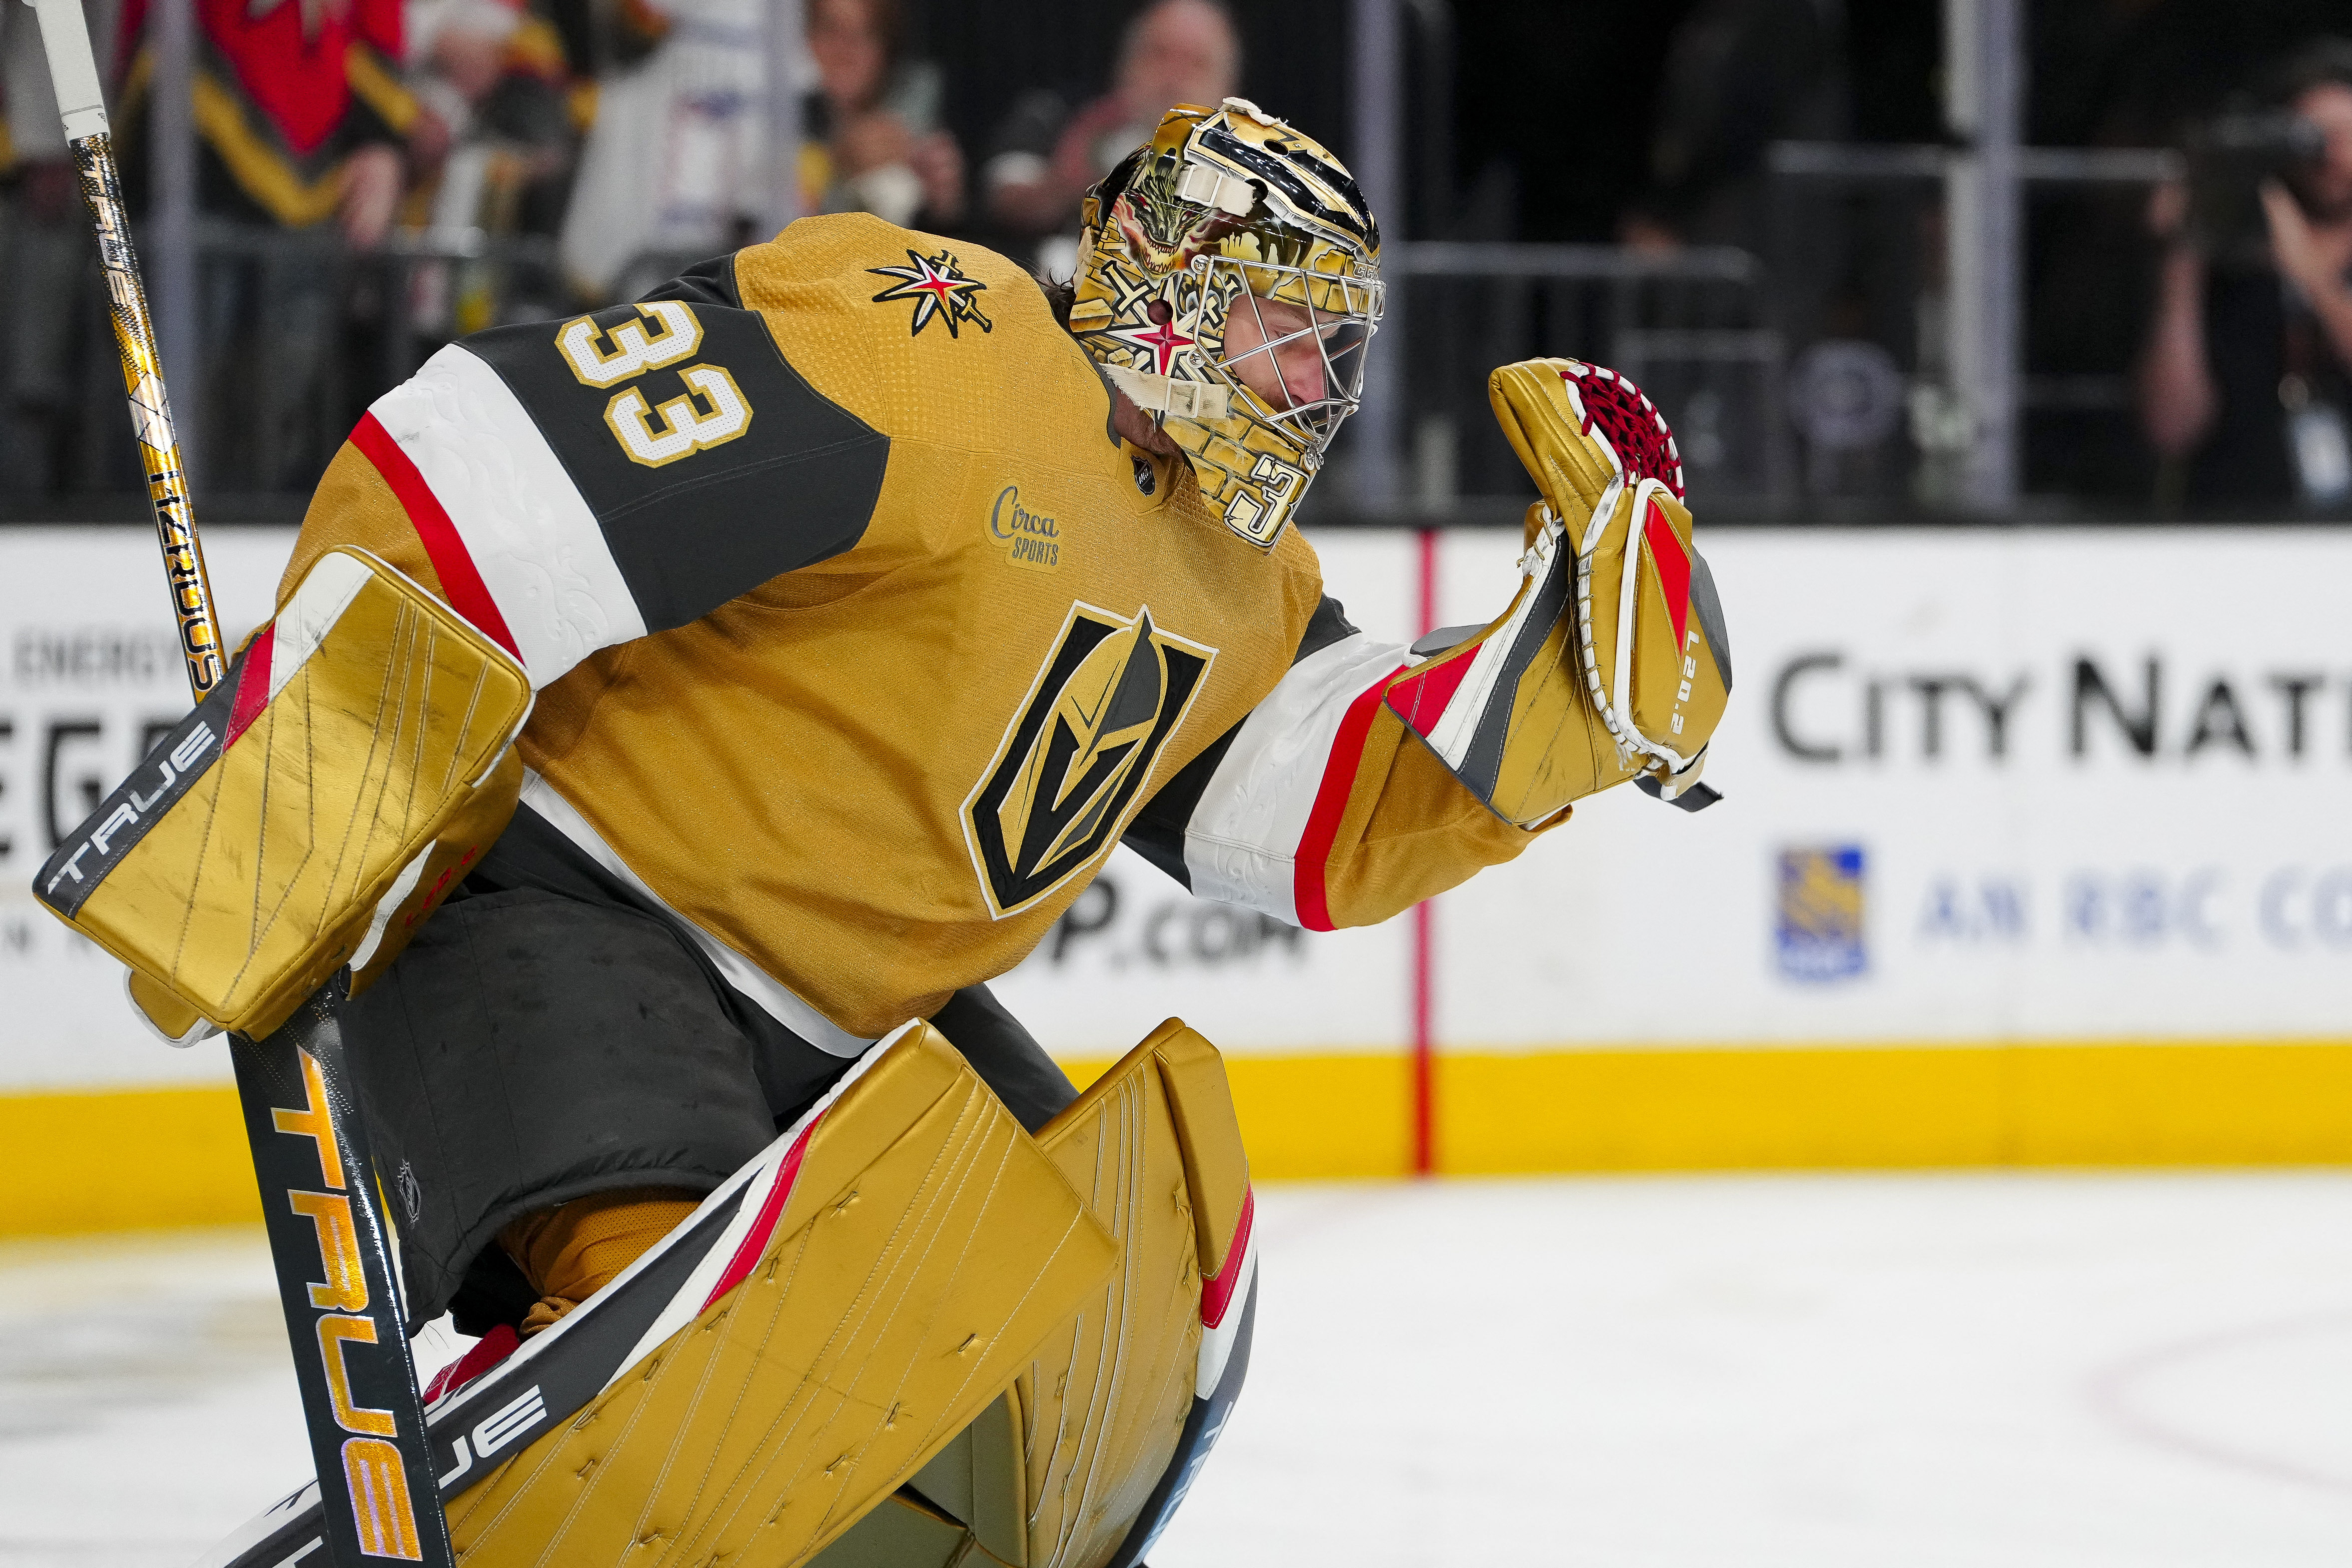 Golden Knights will have to adjust to new goalie pad rules, Golden Knights/ NHL